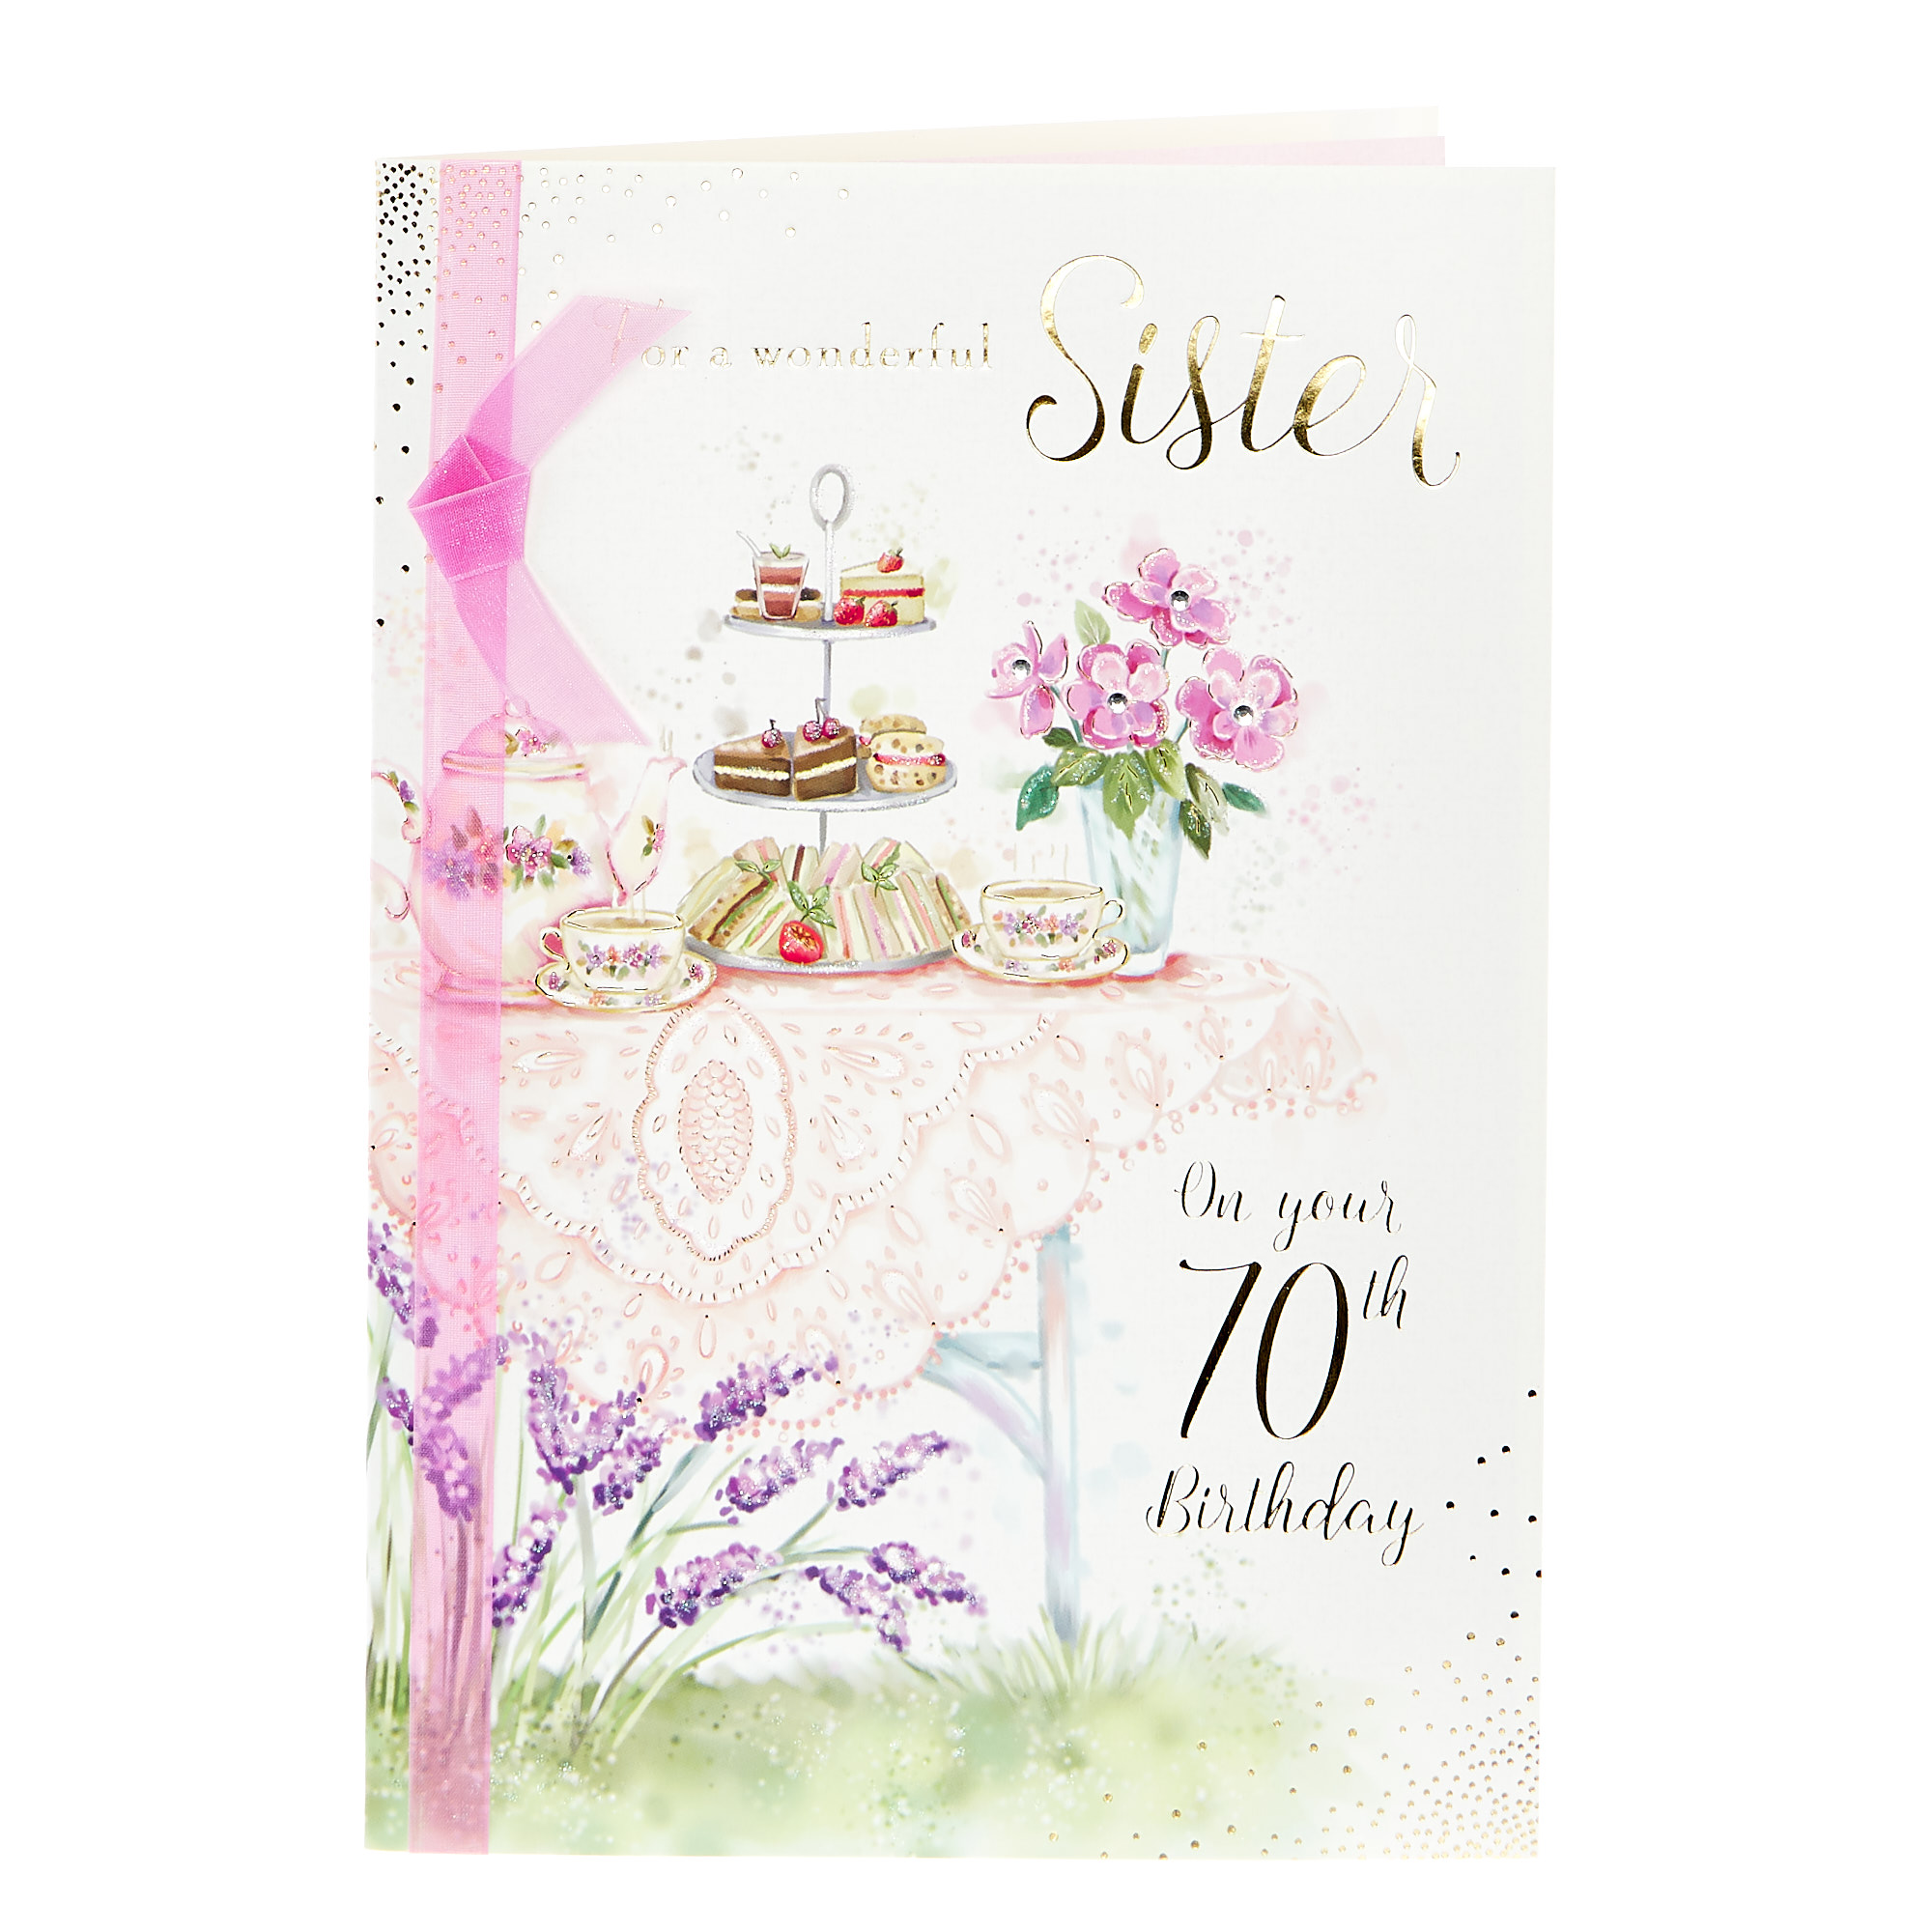 Happy 70th Birthday Card For Sister